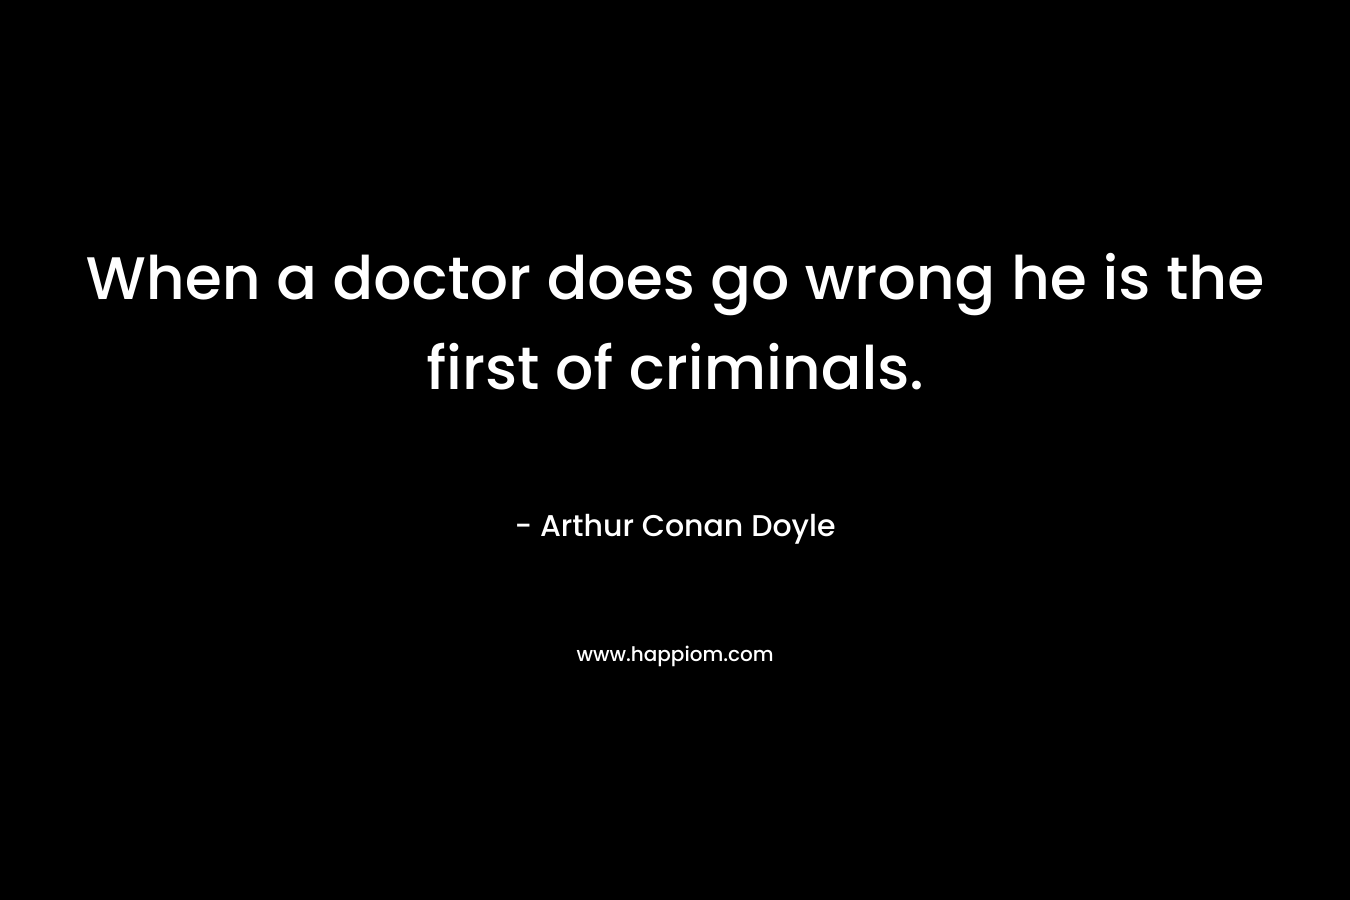 When a doctor does go wrong he is the first of criminals. – Arthur Conan Doyle